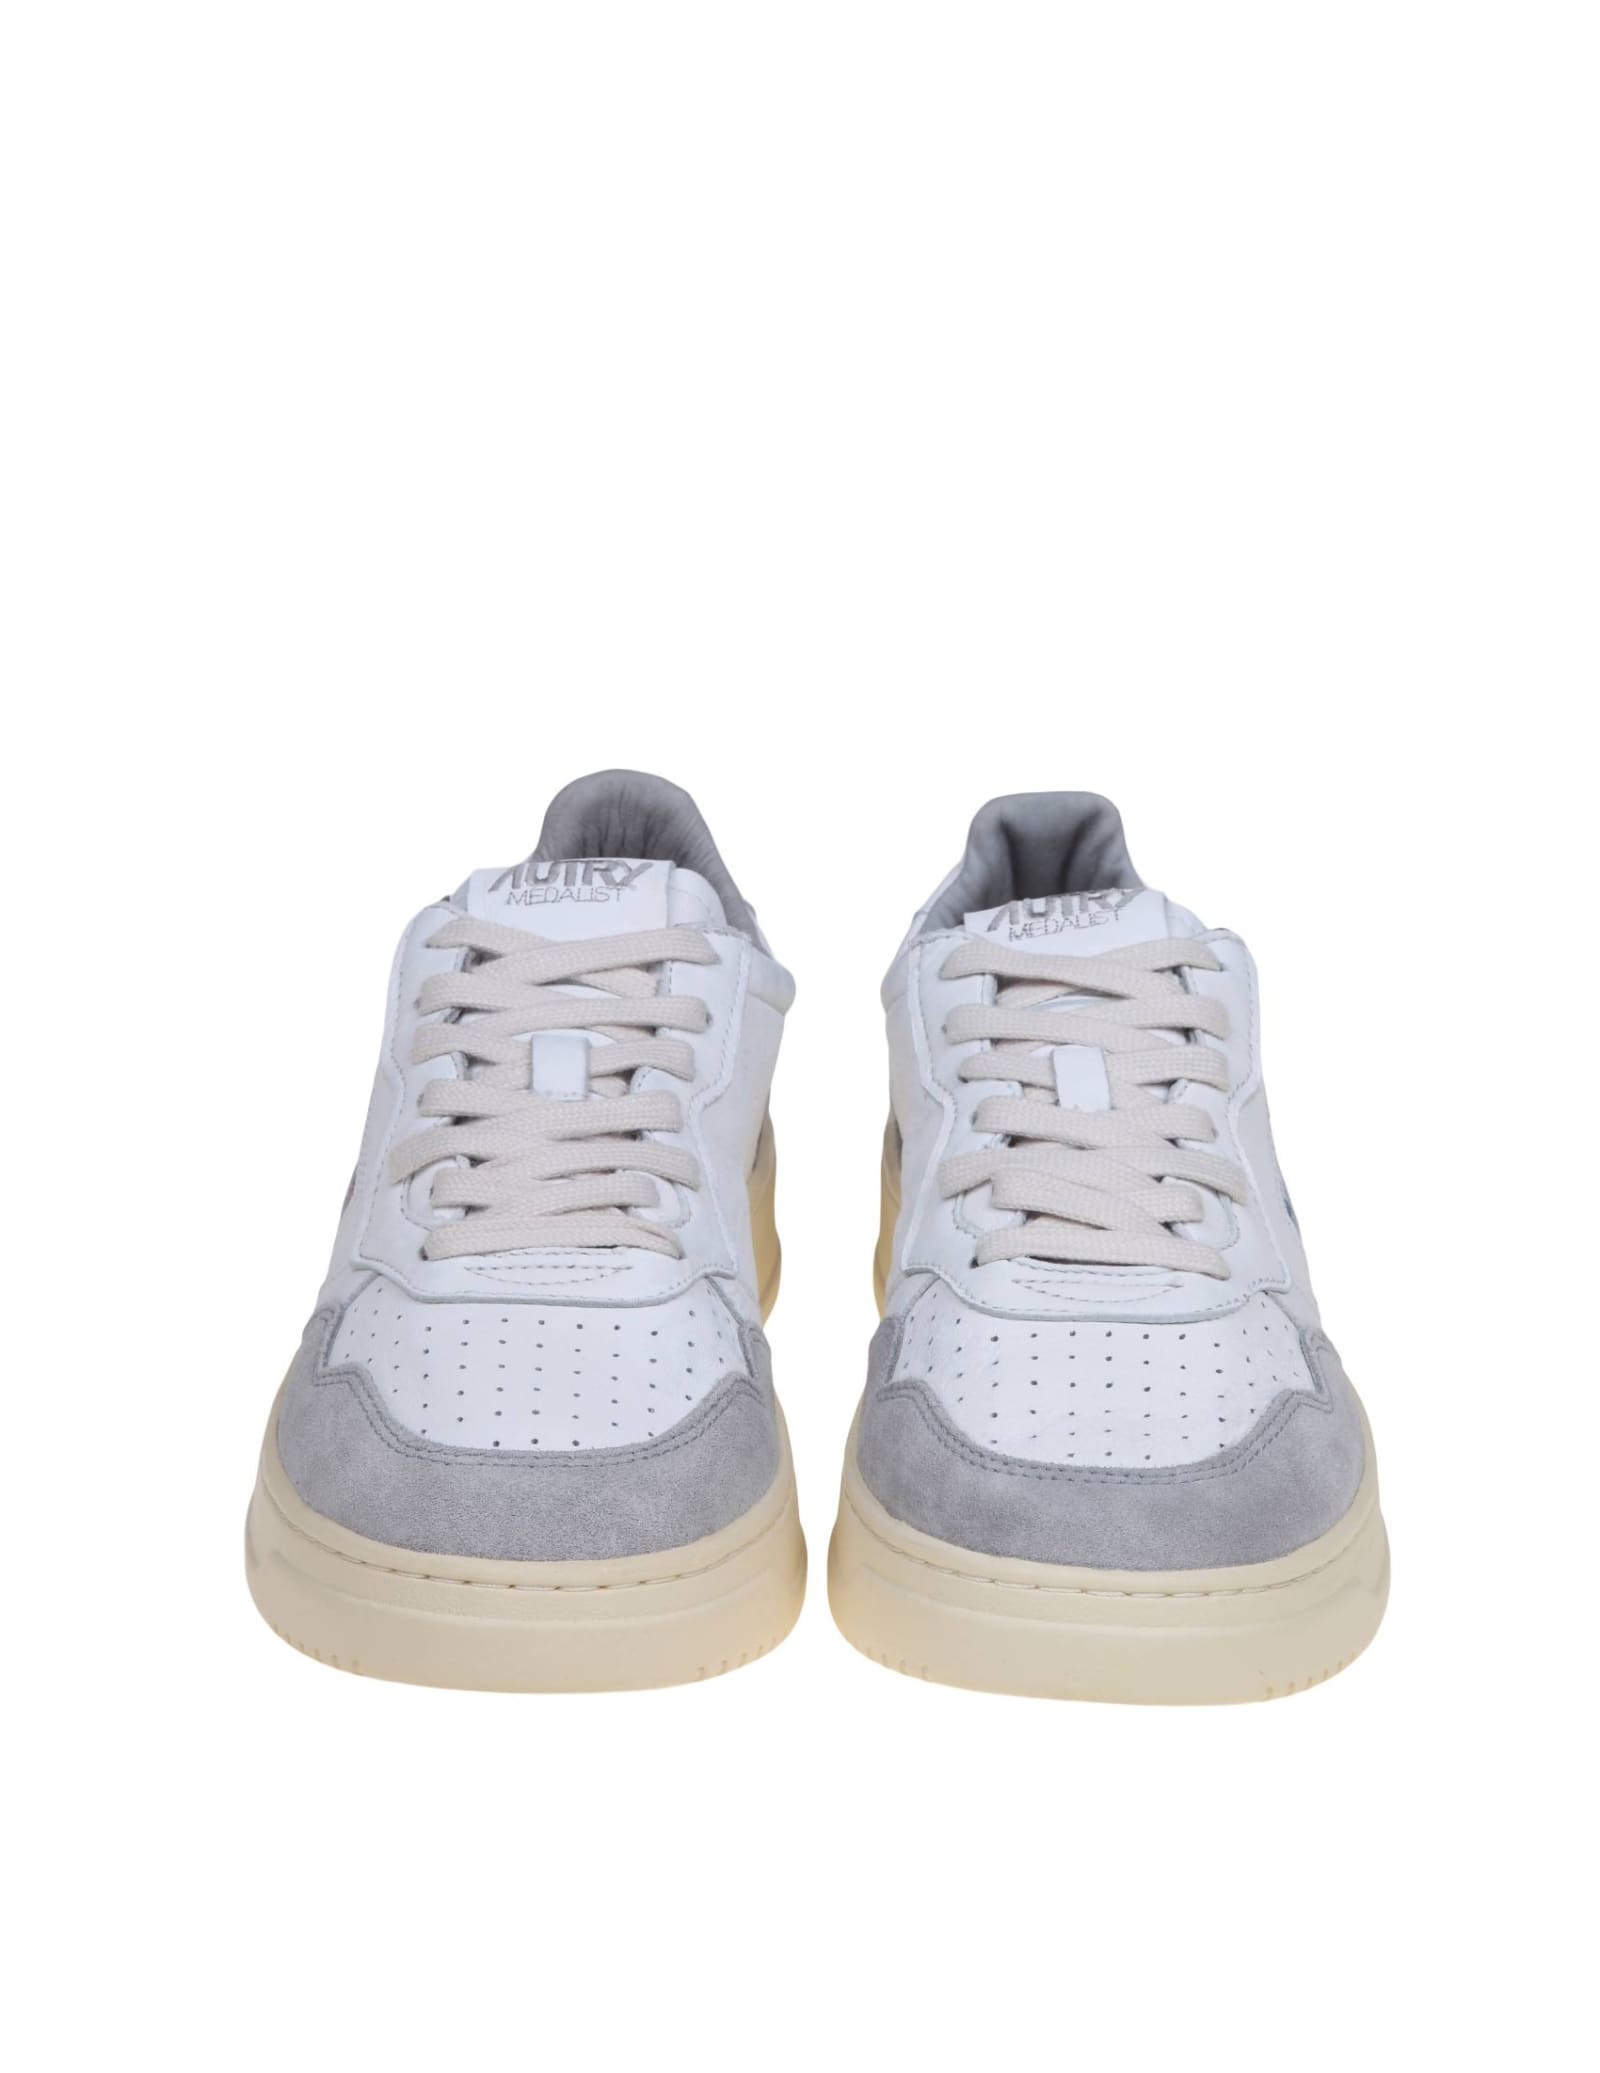 Shop Autry Sneakers In White And Gray Leather And Suede In Bianco